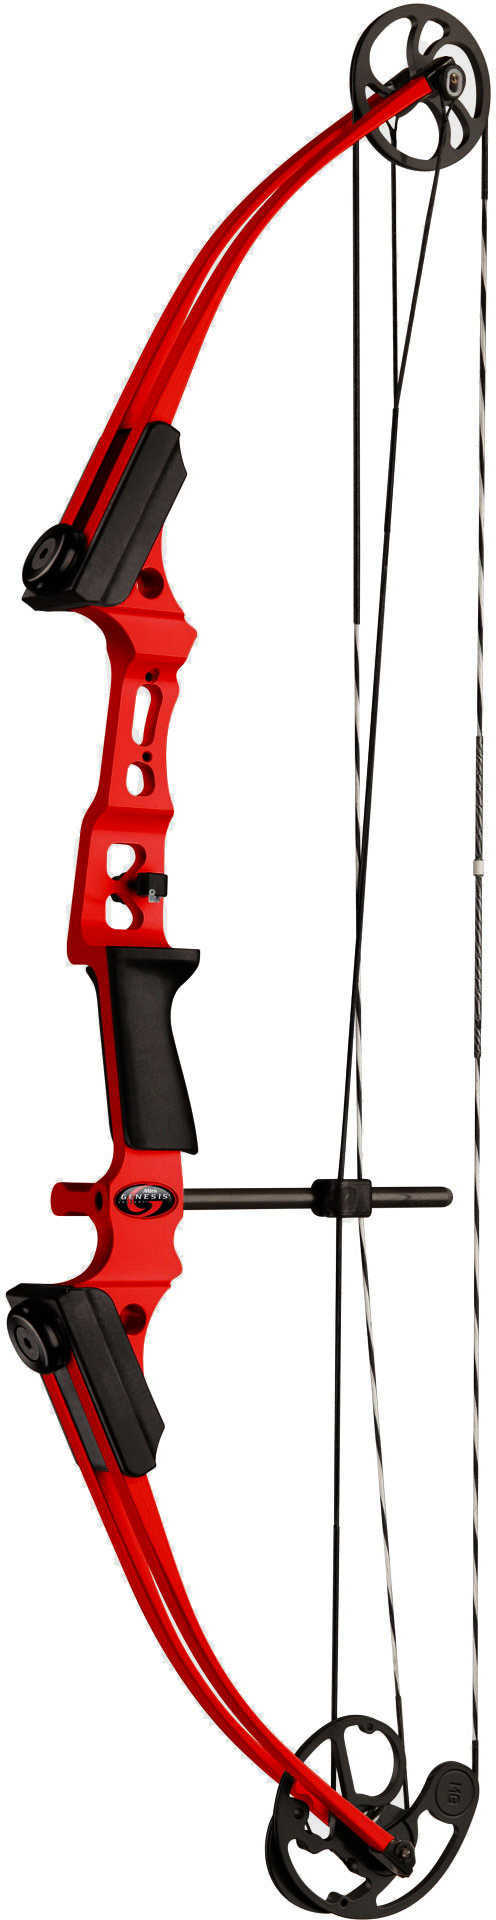 Genesis Mini Bow Left Handed Red Only 11414